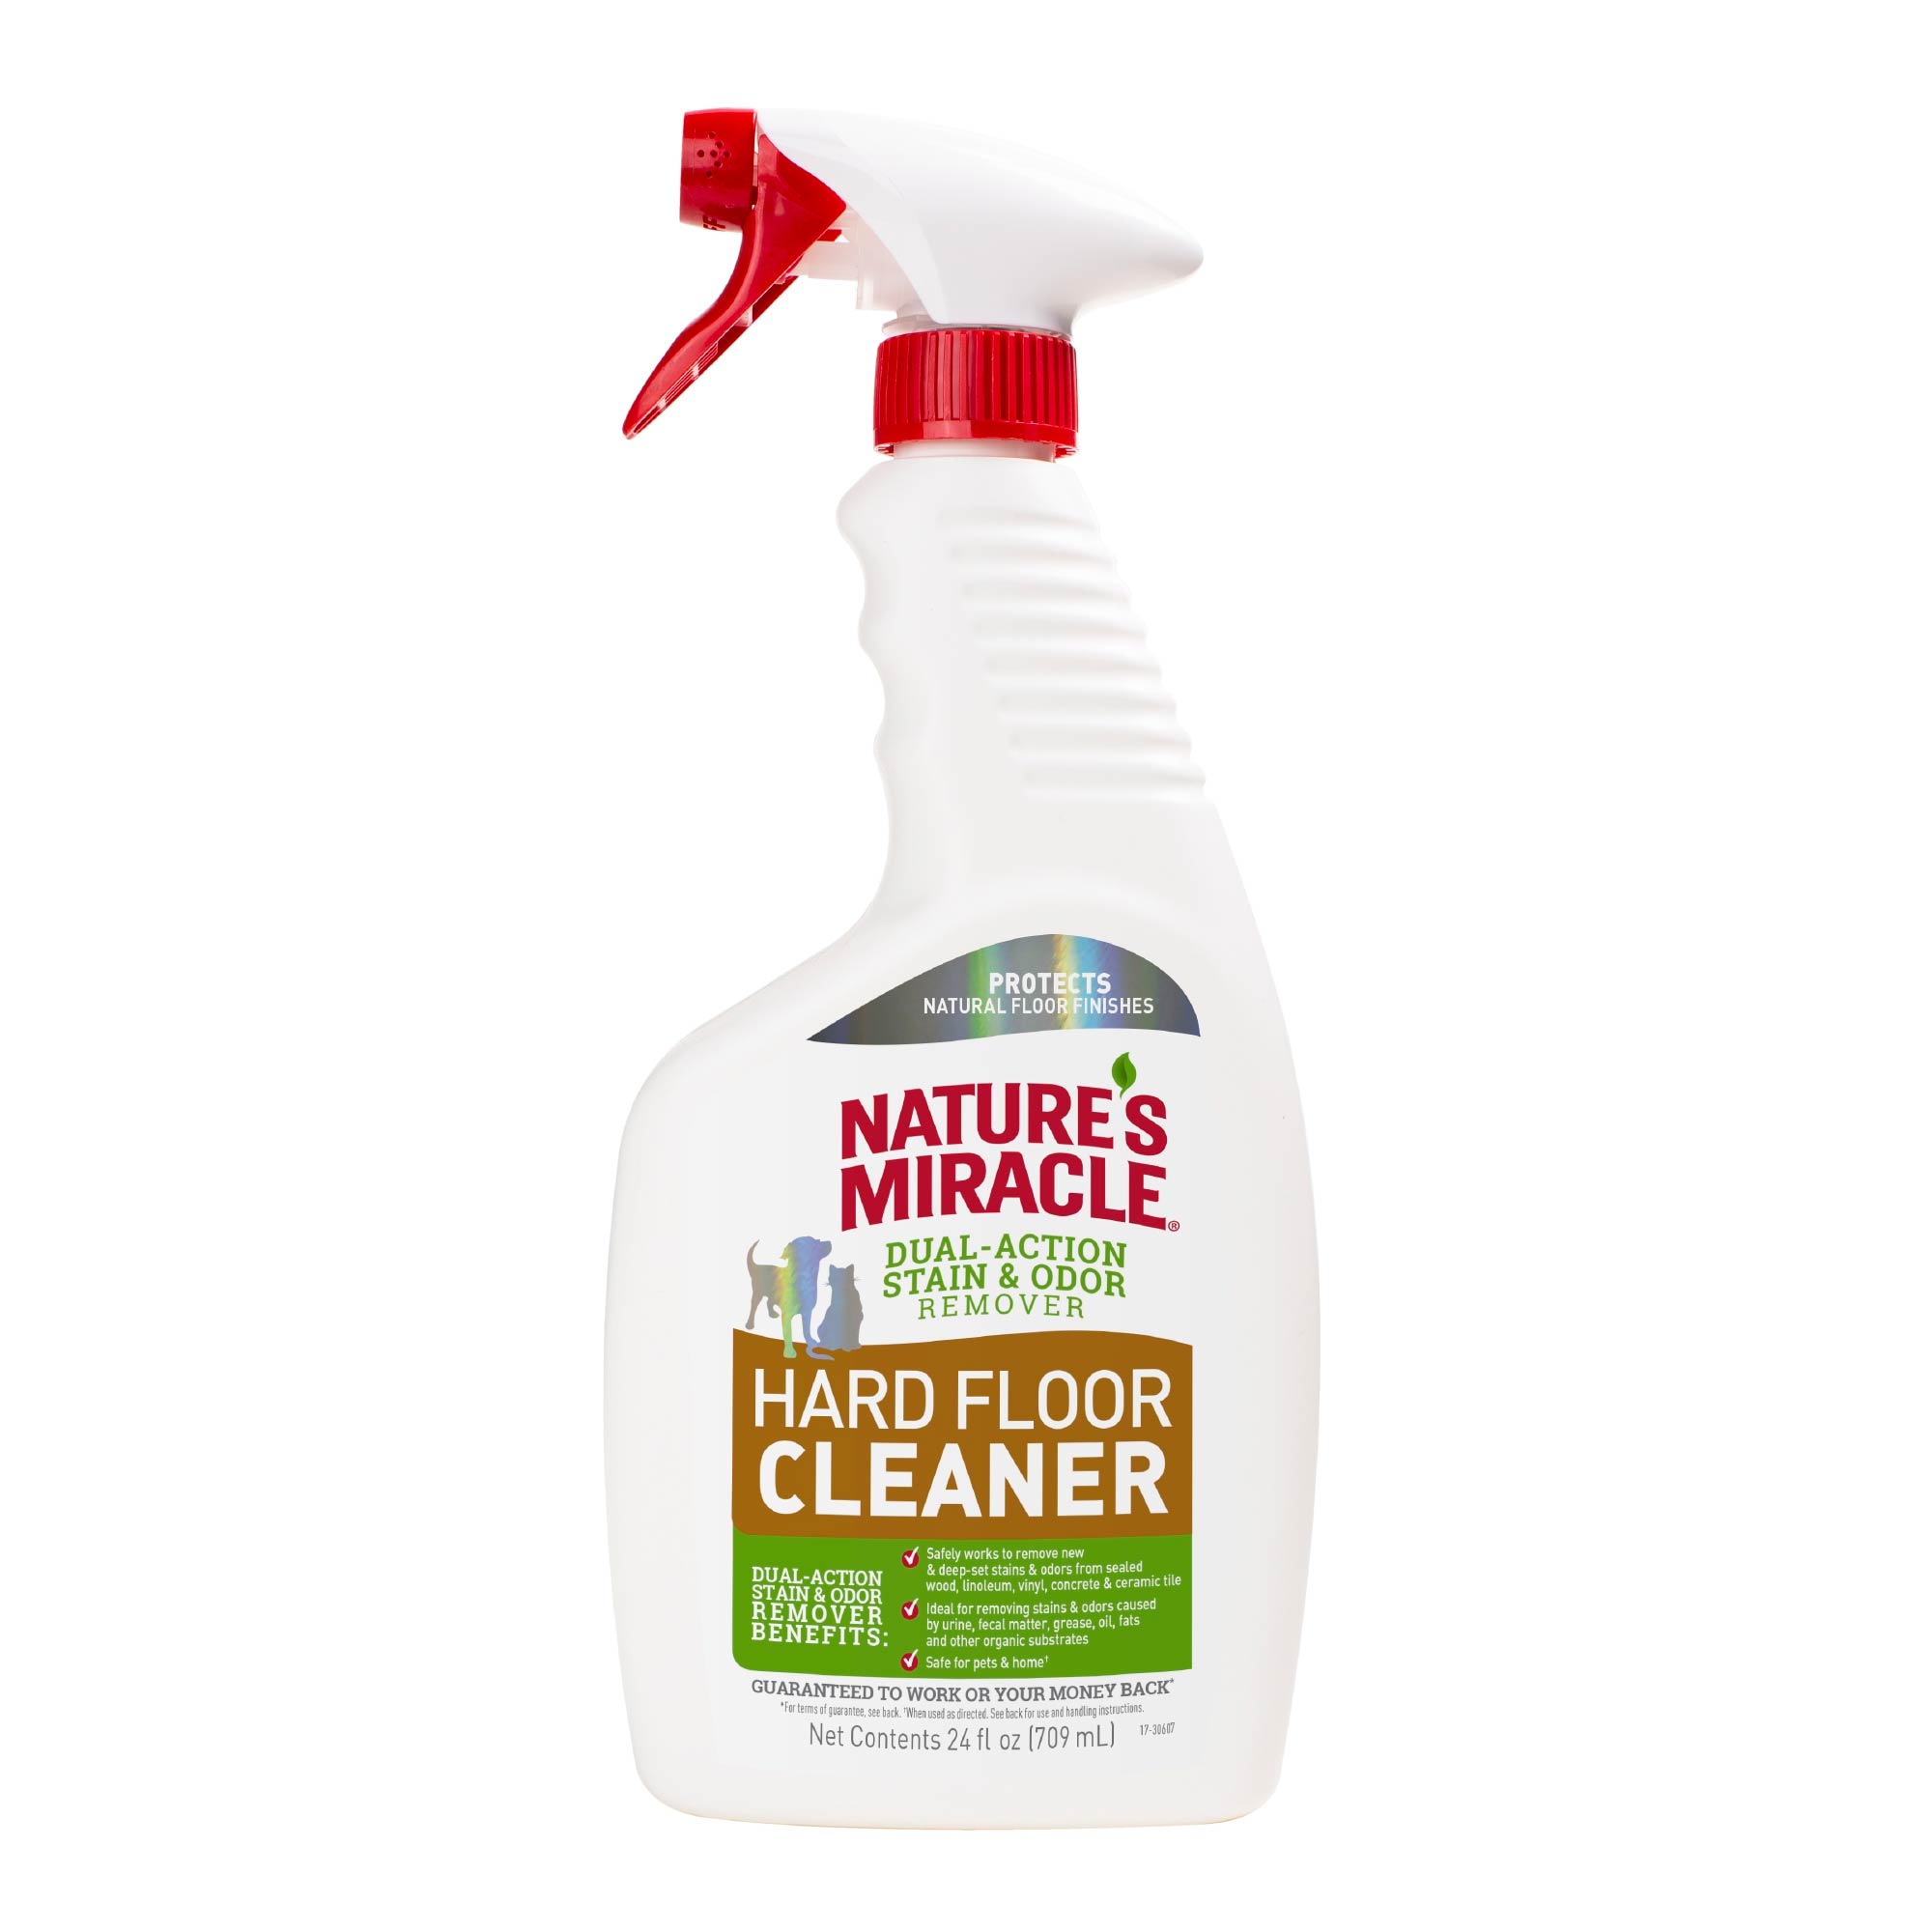 Nature's Miracle Hard Floor Cleaner, Dual-Action Stain & Odor Remover